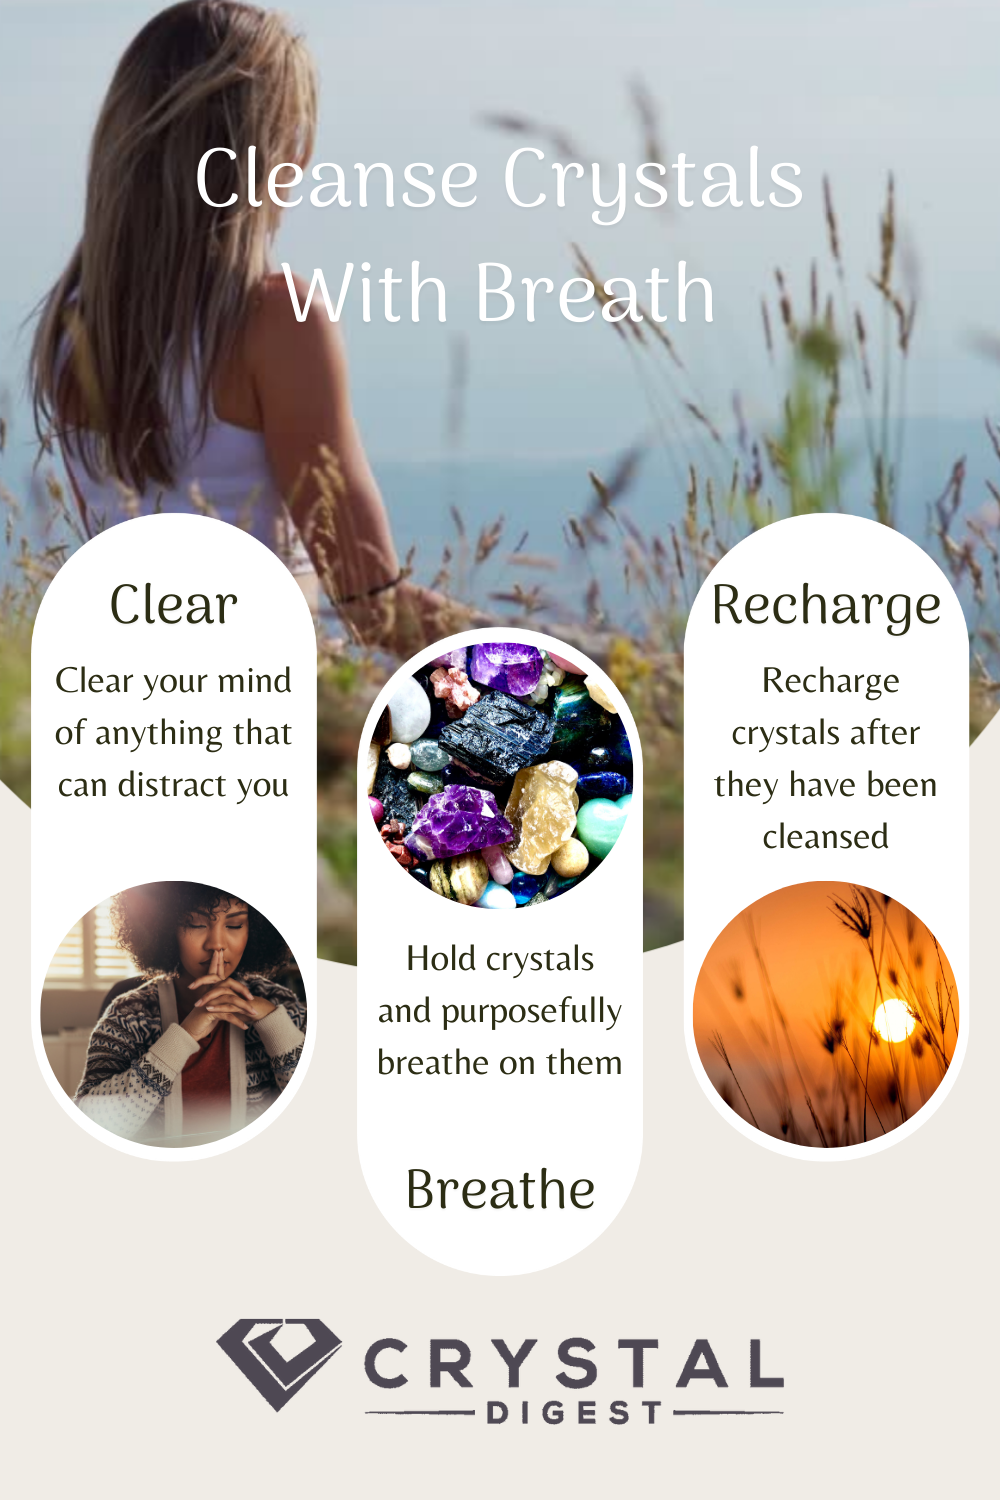 How to cleanse crystals with breath